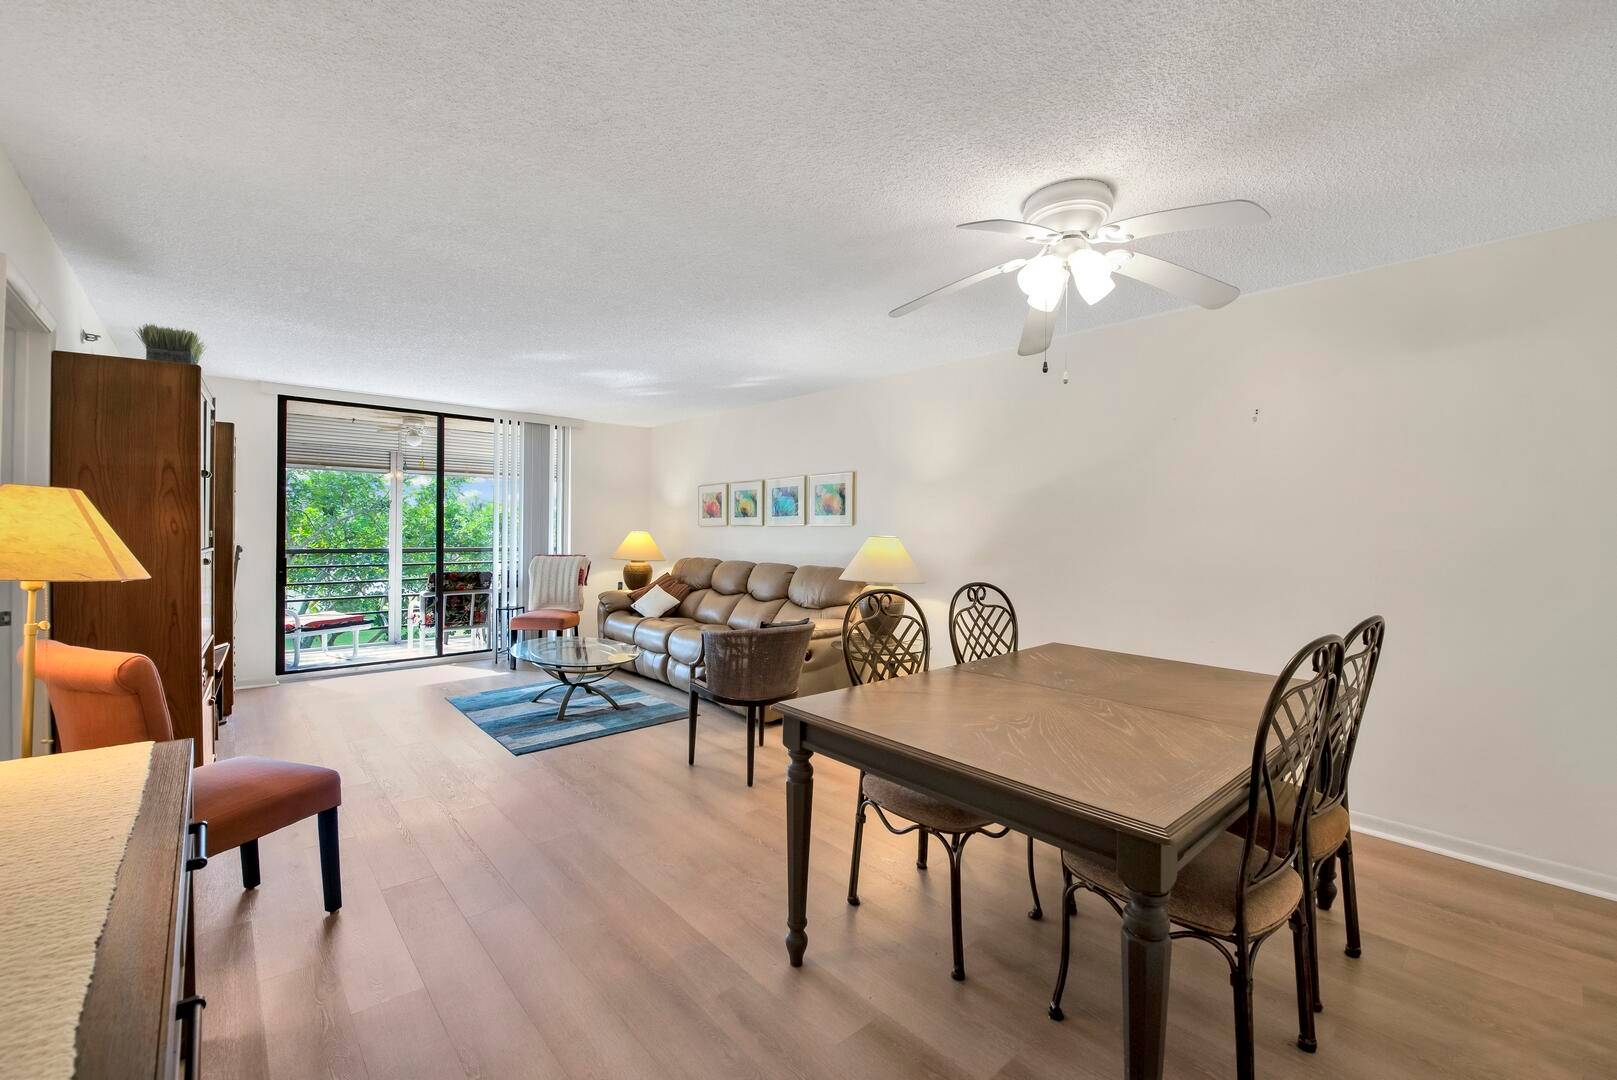 Welcome to this exquisite 2 bedroom, 2 bath condo nestled within the prestigious Lucerne Pointe community.